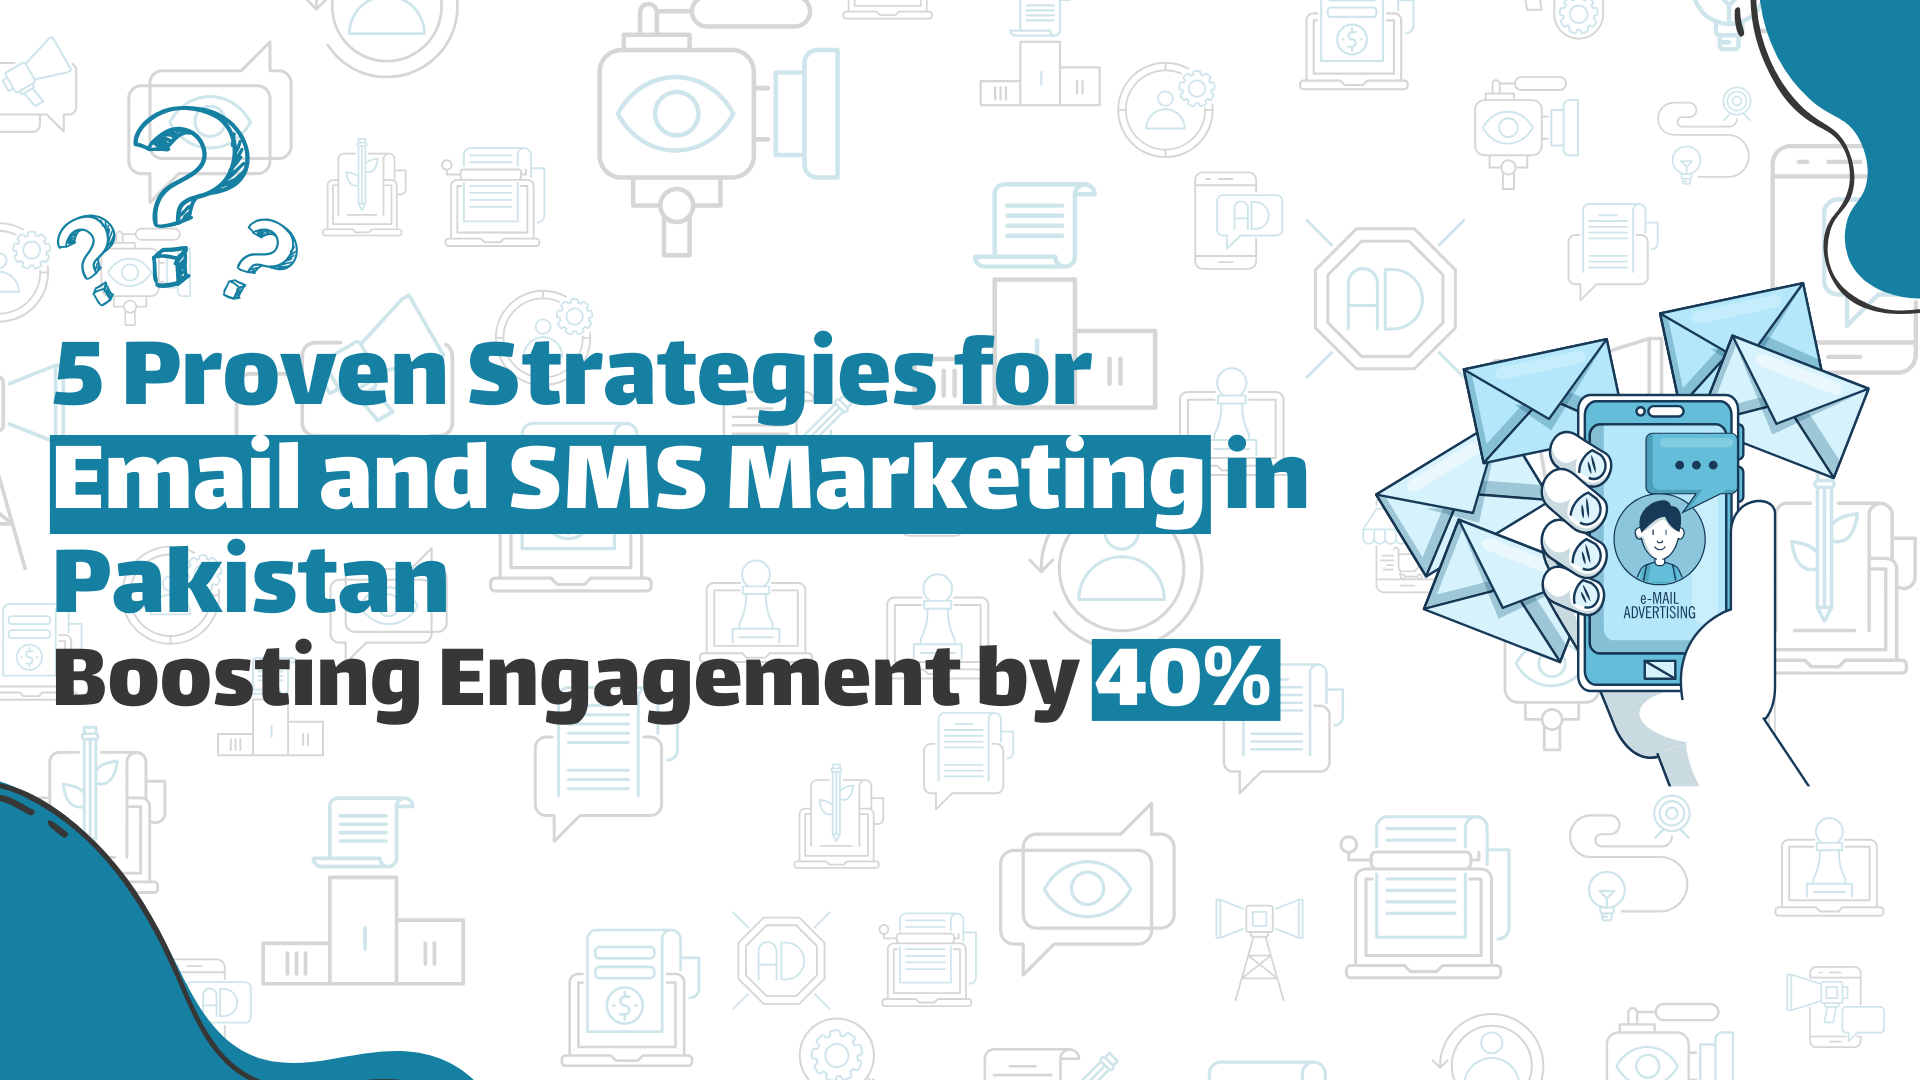 Email & SMS Marketing. A digital marketing infographic titled ‘5 Proven Strategies for Email and SMS Marketing in Pakistan’, claiming to boost engagement by 40%. The design includes a laptop with code brackets on the screen, various marketing and technology icons, and a blue decorative element at the bottom left.